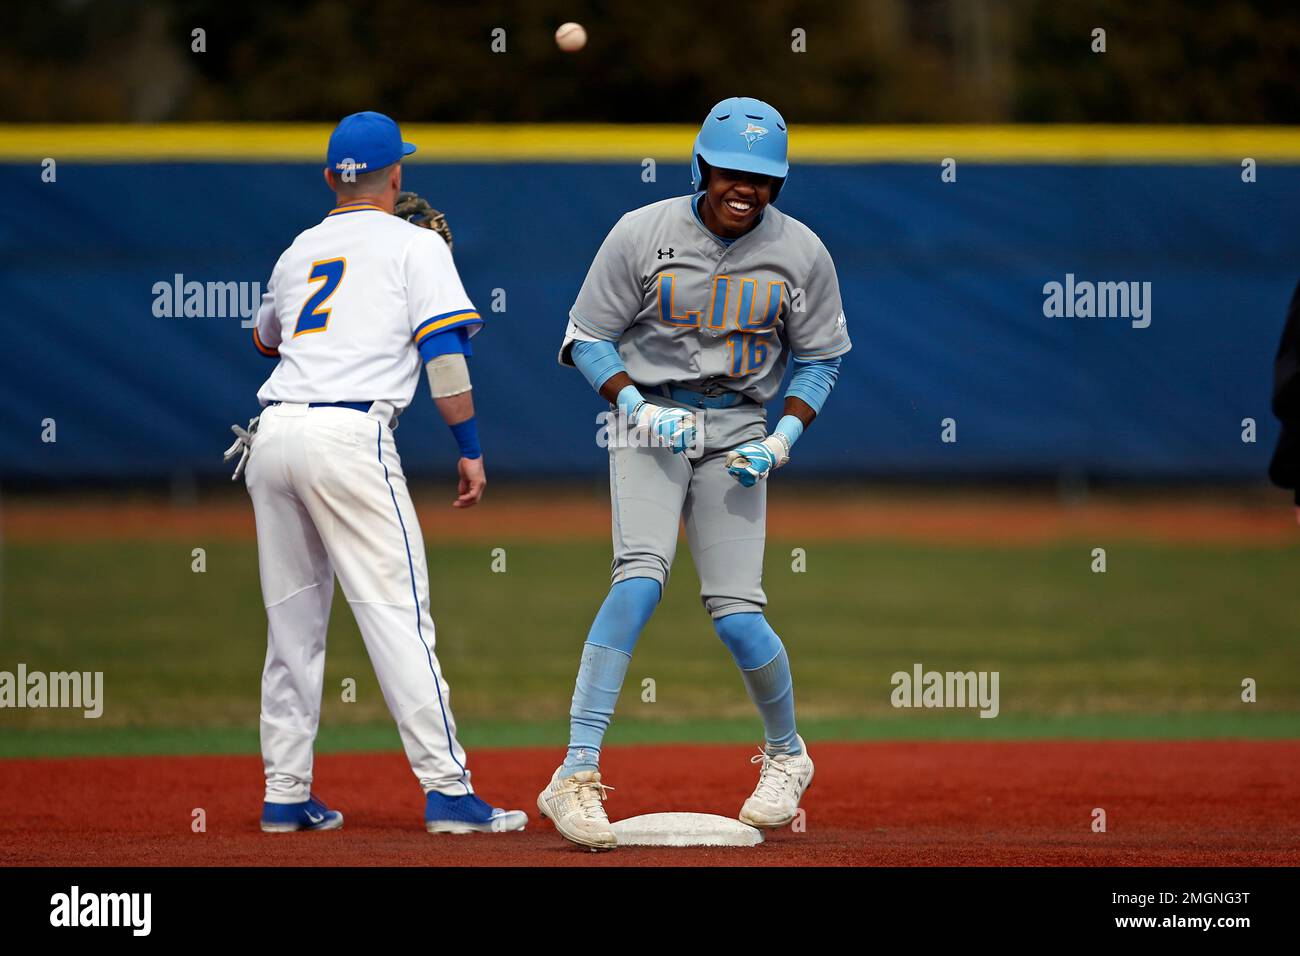 LIU's Carlton Harper reacts after hitting a double against Hofstra during  an NCAA baseball game on Wednesday, March 11, 2020, in Hempstead, N.Y. (AP  Photo/Adam Hunger Stock Photo - Alamy